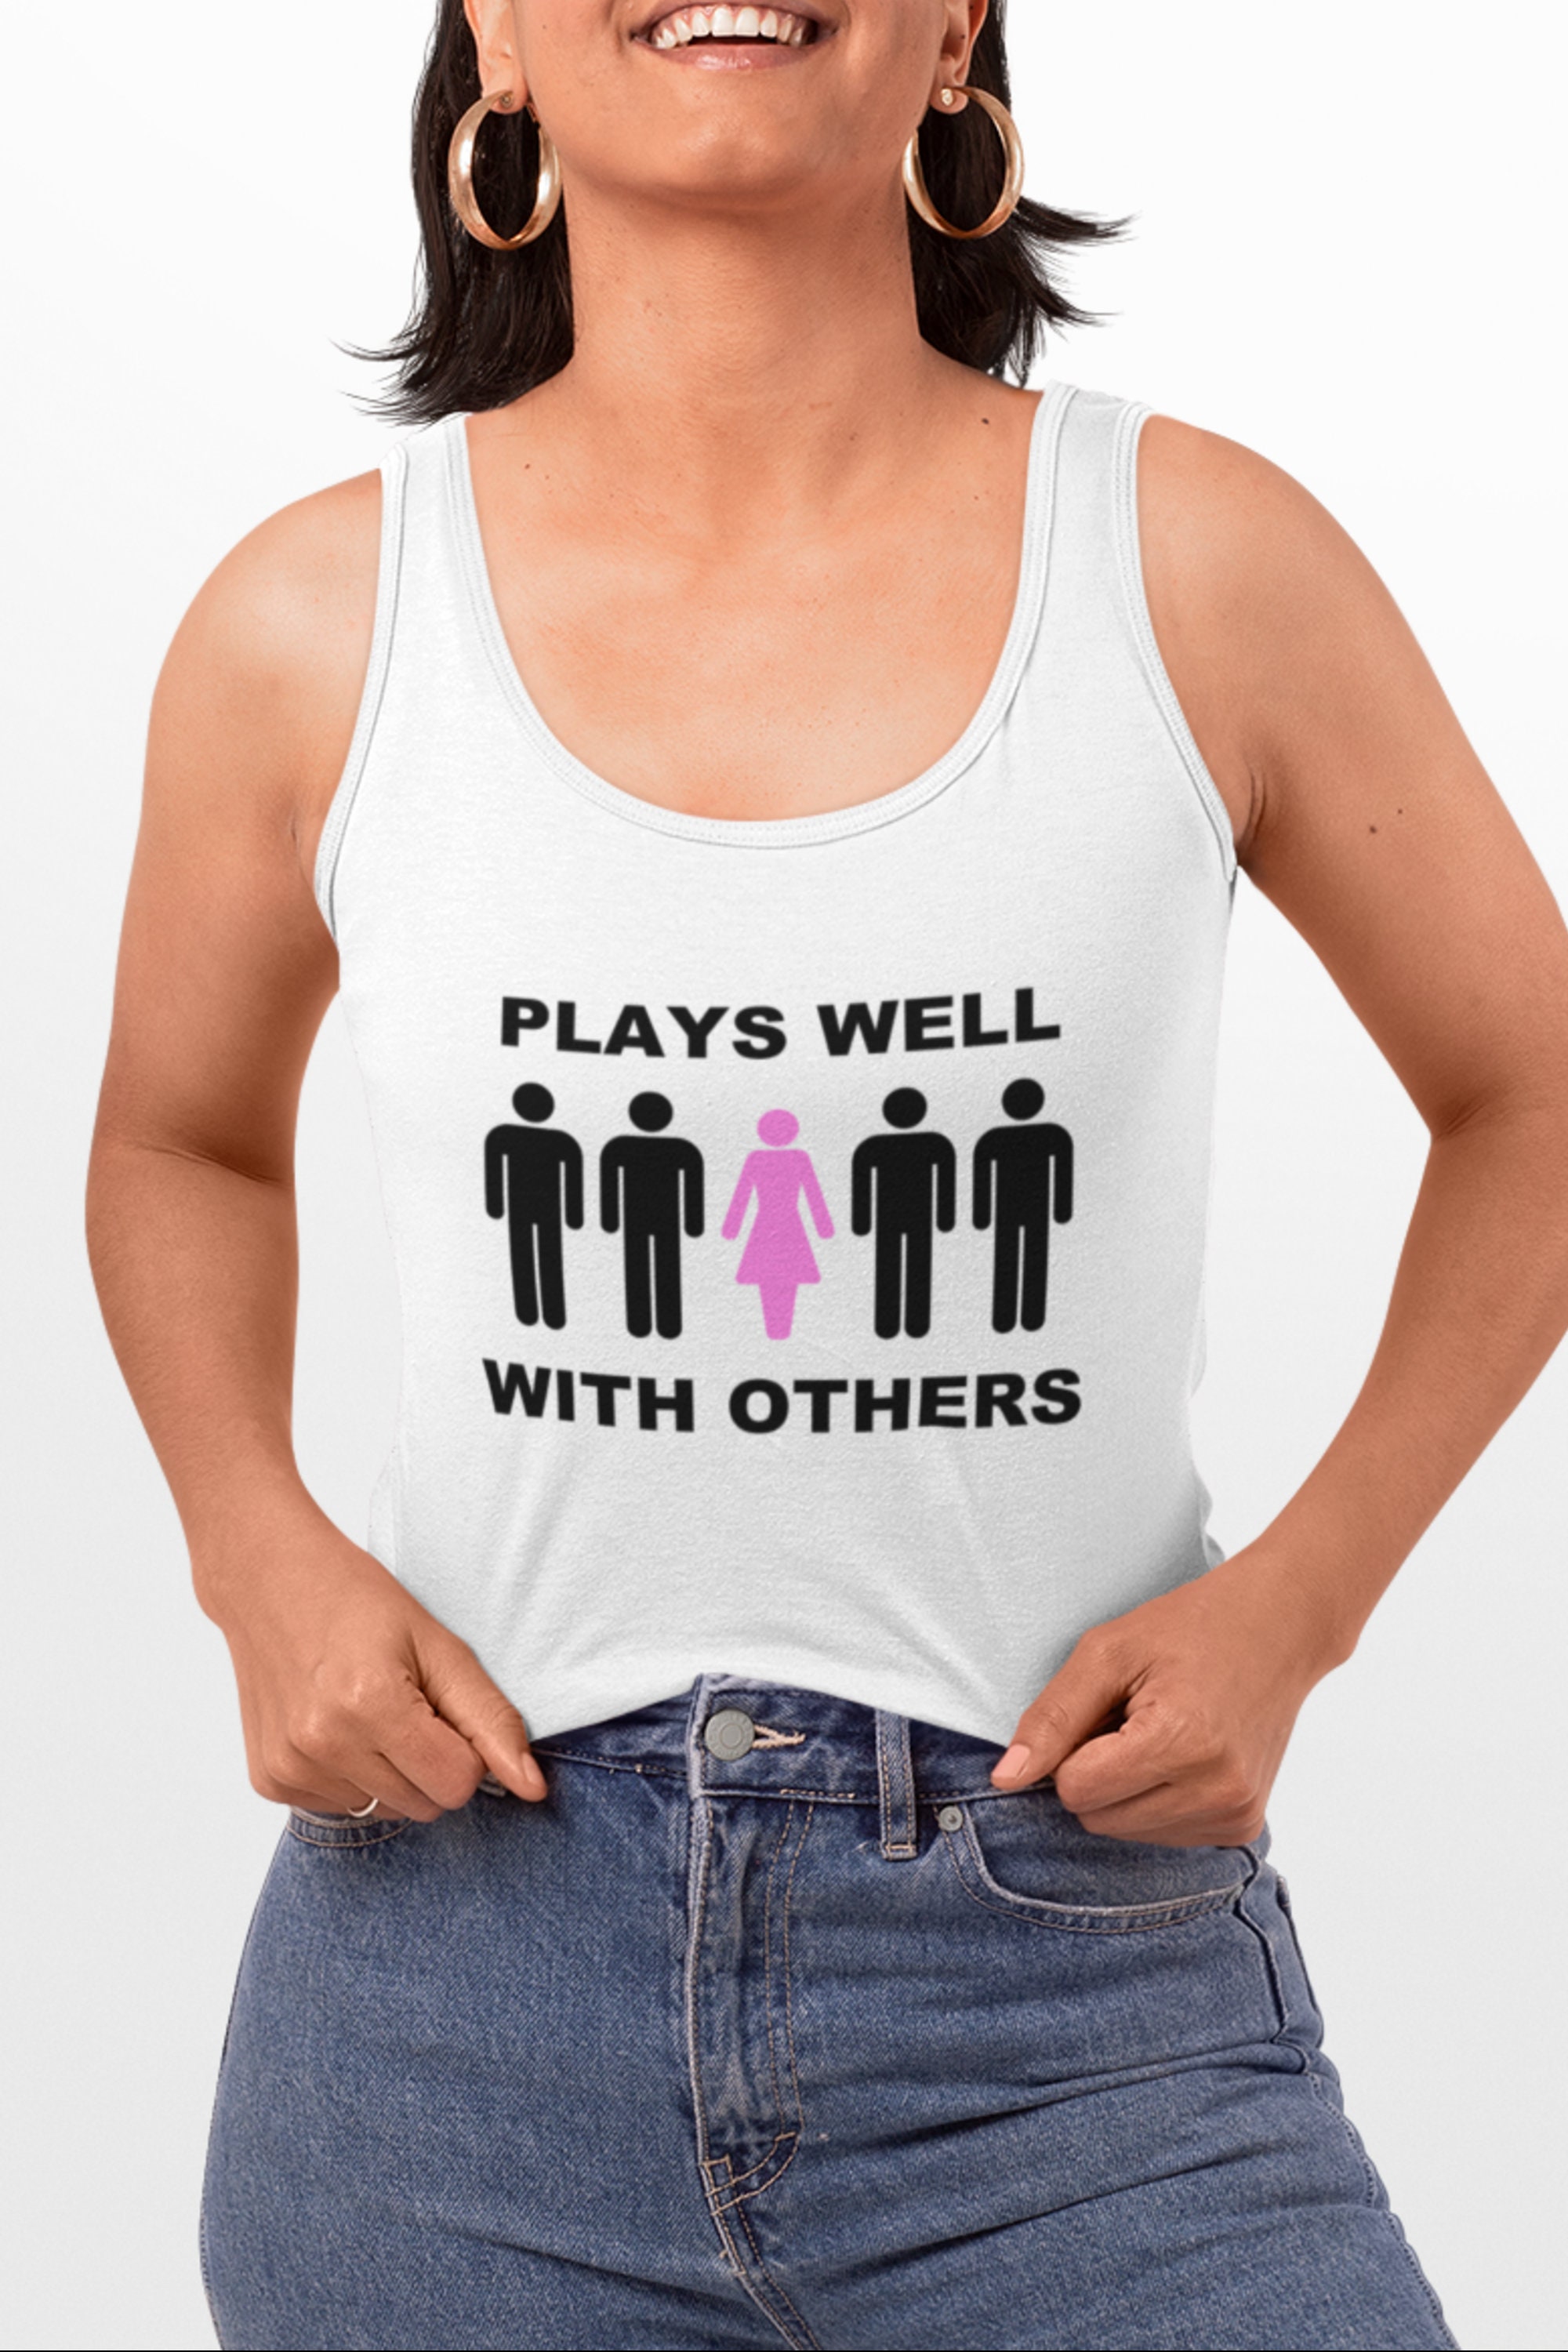 Hotwife Clothing Gangbang Shirt Tank Top Slutty Group Sex Etsy picture picture